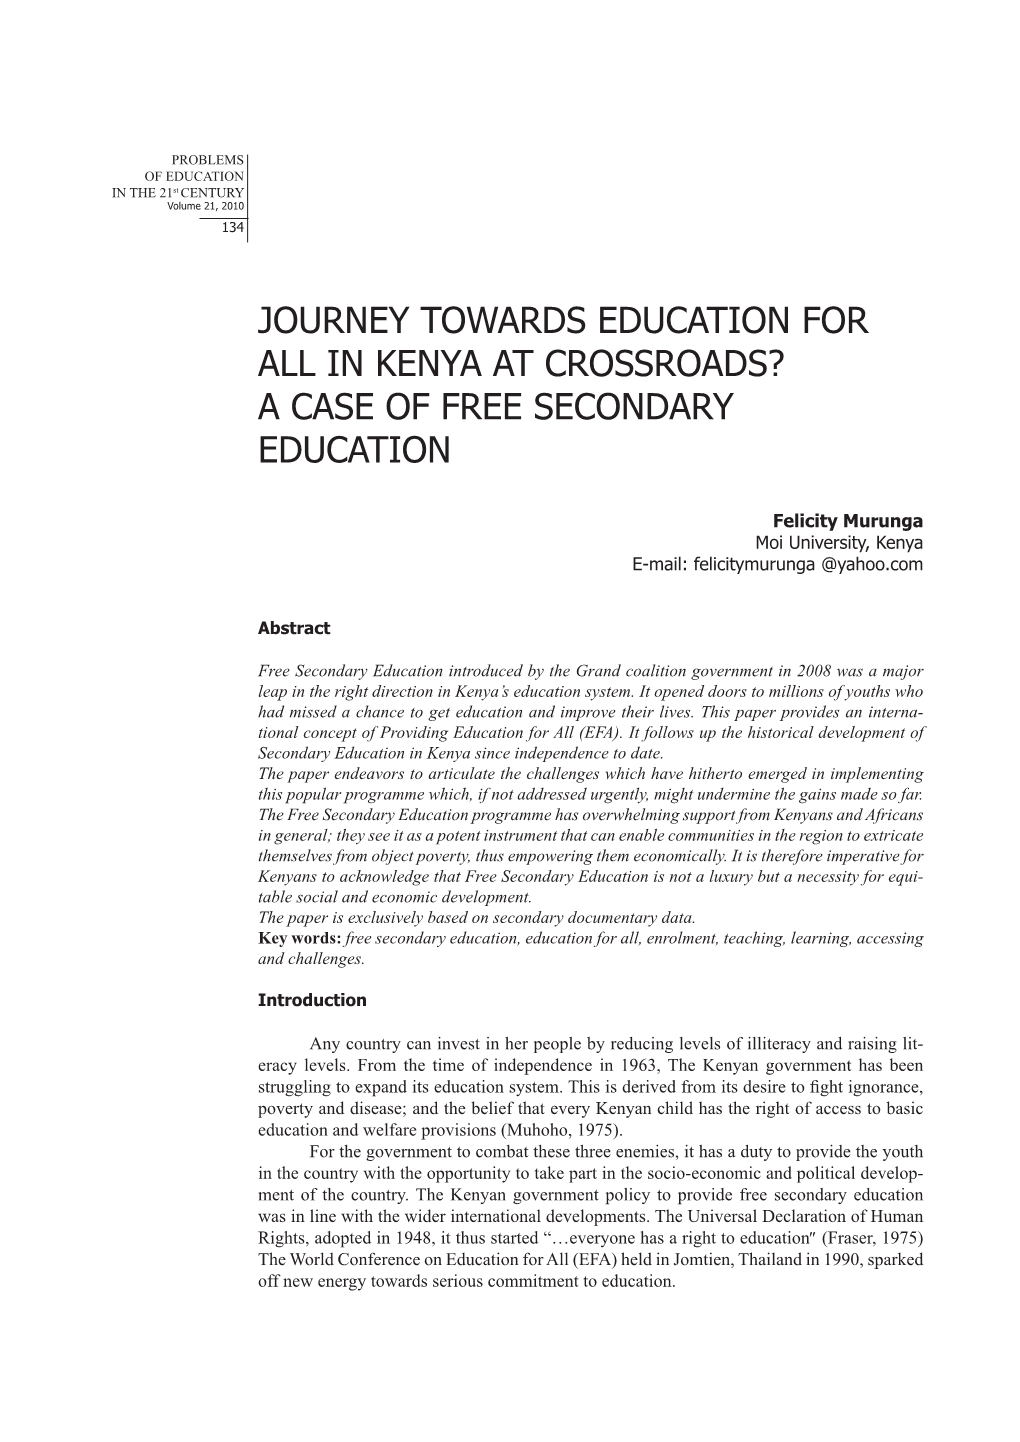 A Case of Free Secondary Education